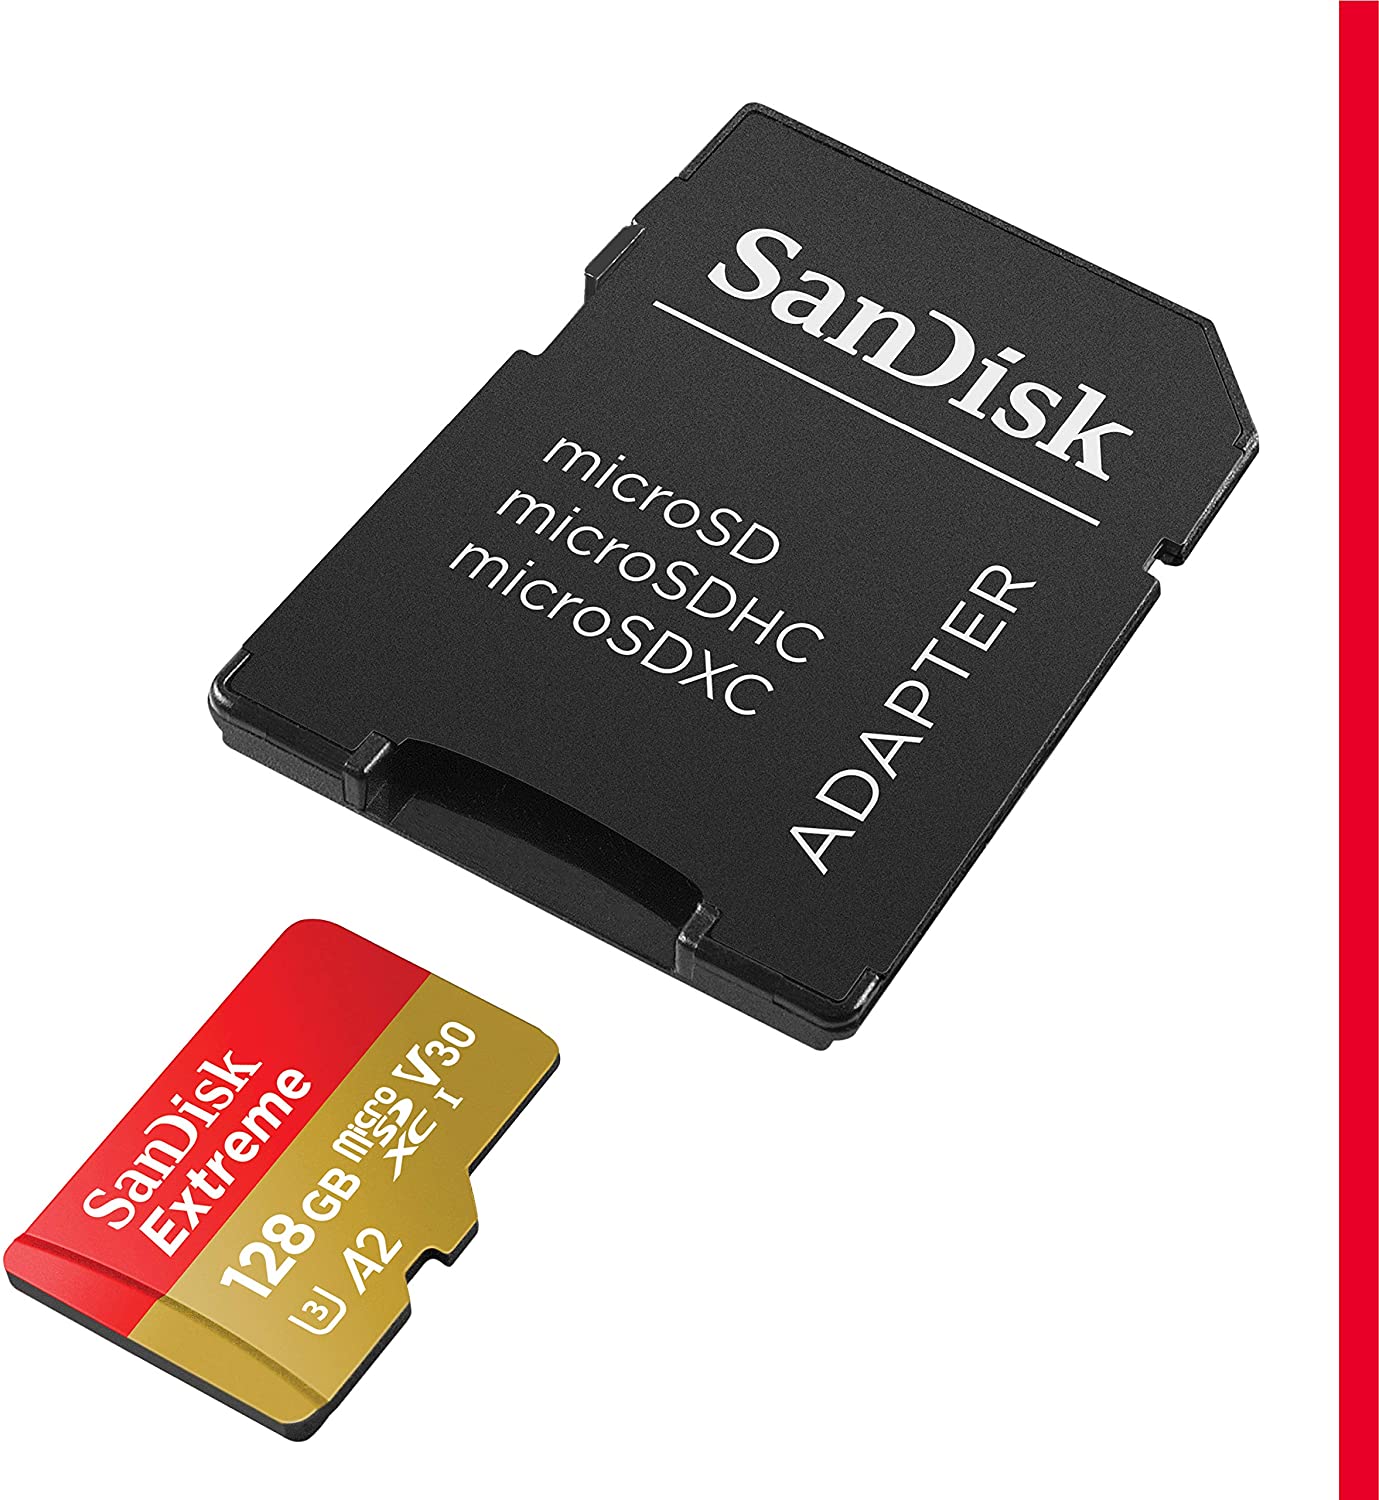 handleiding Schuine streep fiets SanDisk Extreme Micro SD card, 128GB with SD Adapter - CamDo Solutions